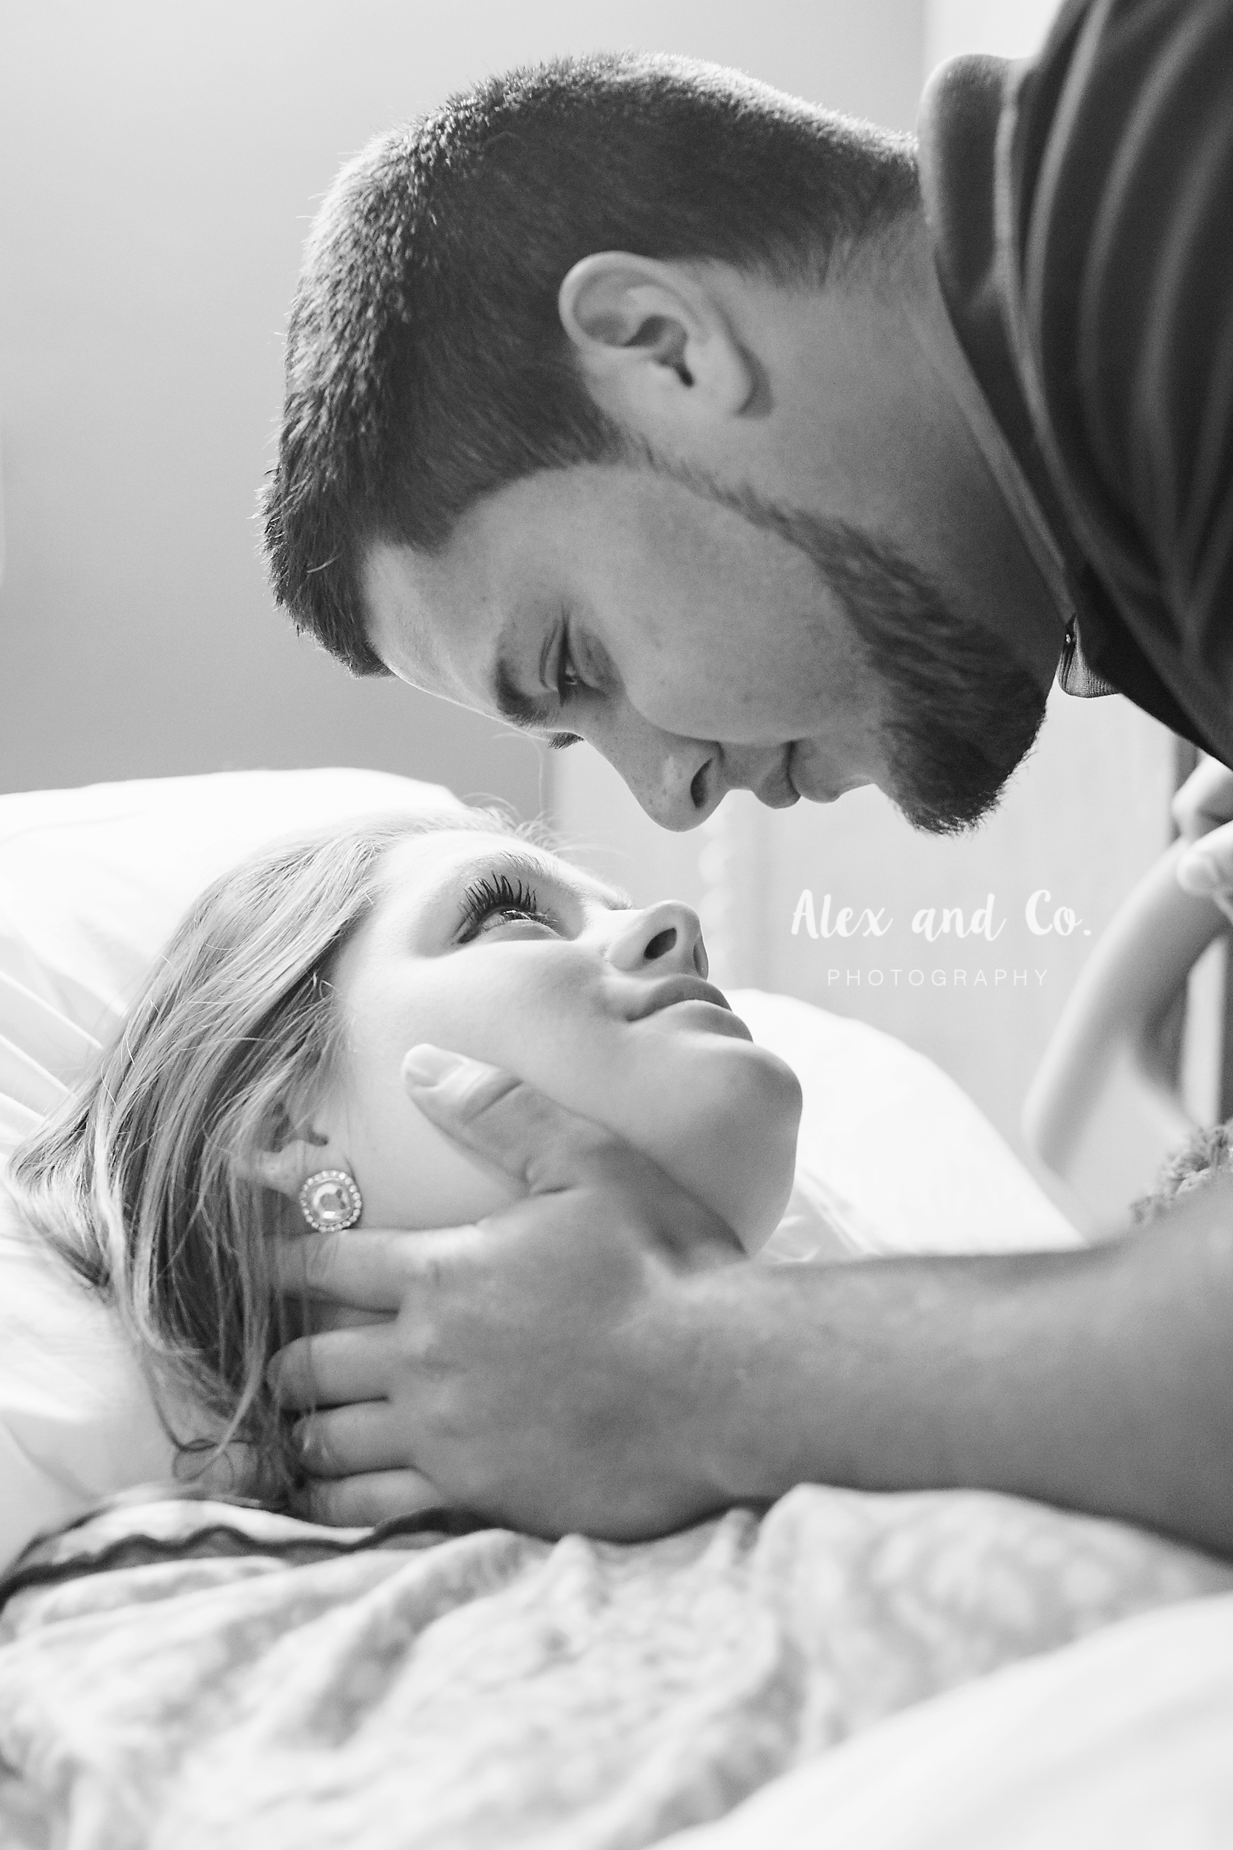 Tampa Bay Area Birth Photographer | Spring Hill FL | Alex and Co Photography